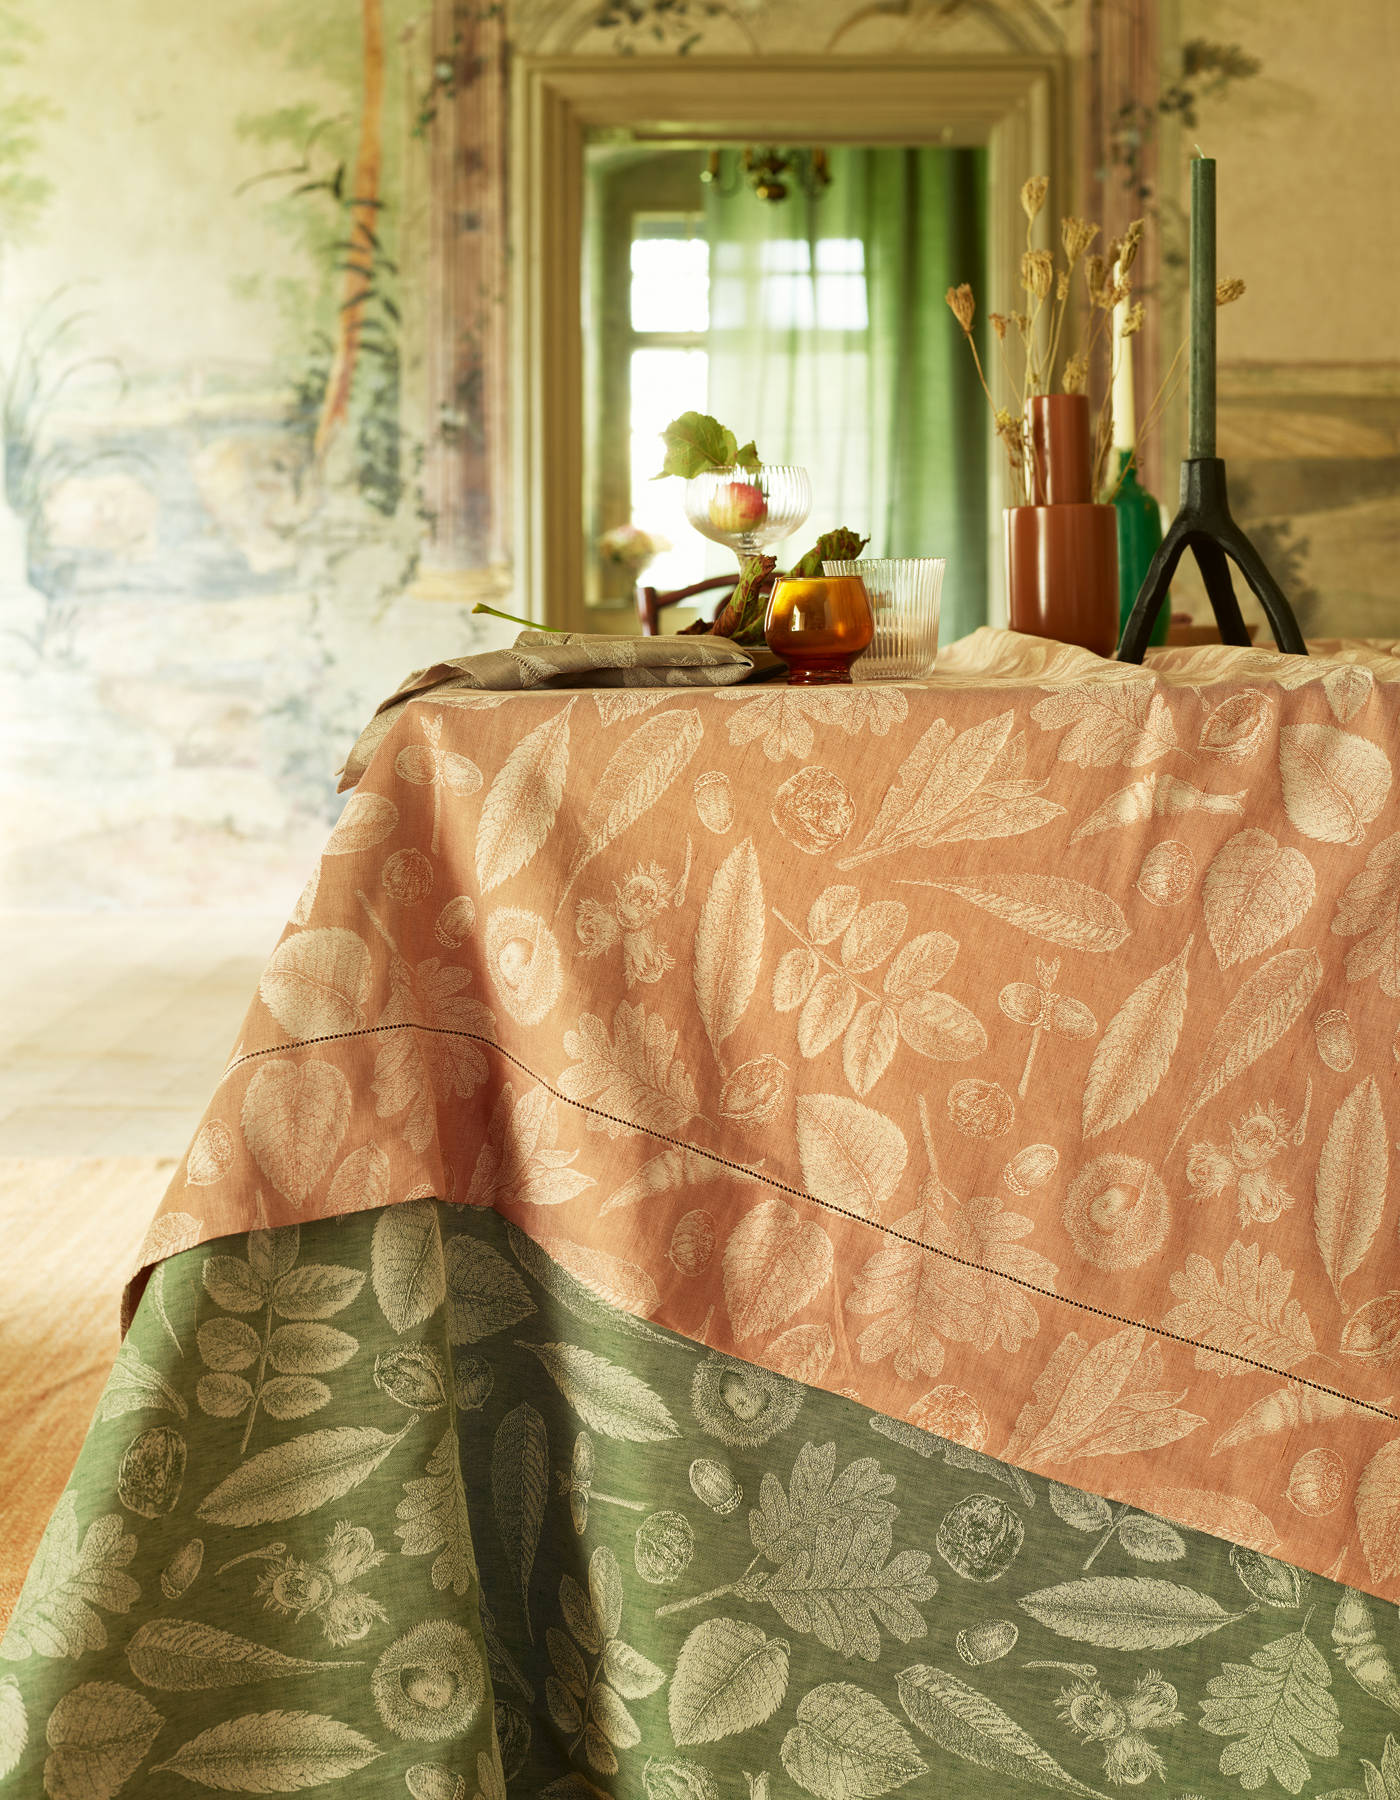 Discover our autumnal favourites for bed, table, bath and kitchen. A seasonal selection full of atmosphere.